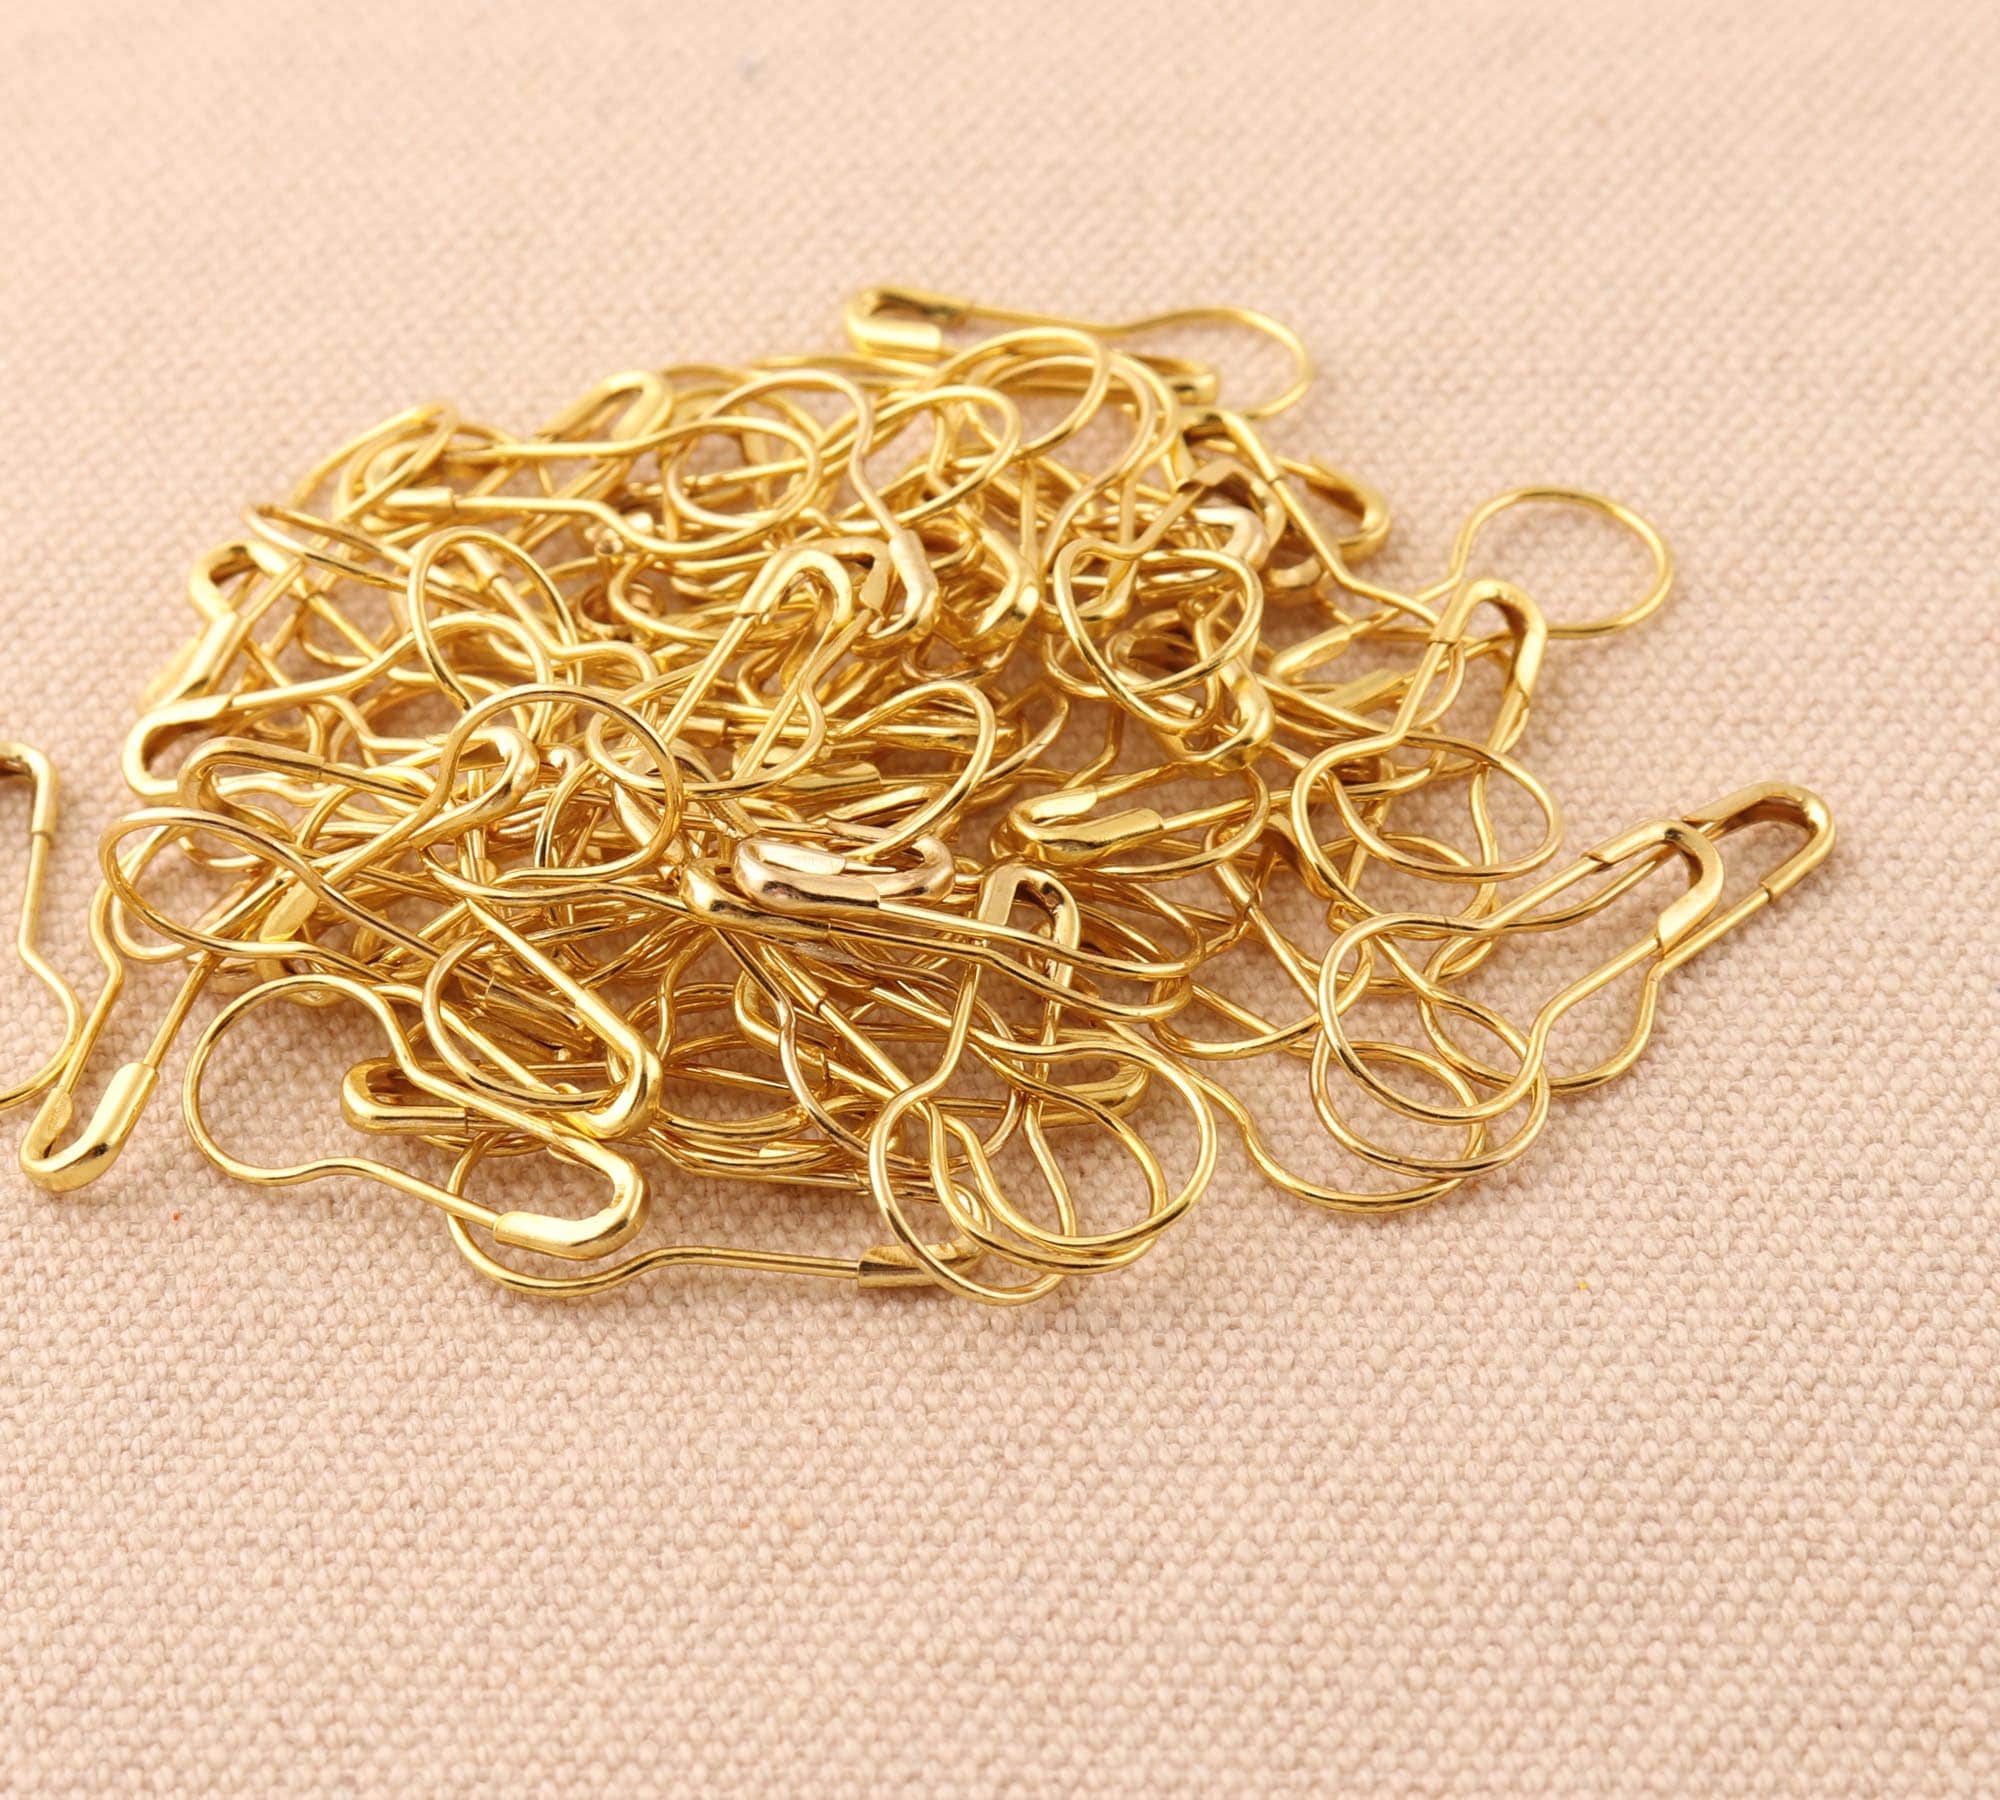 Colorful Brass Blub Safety Pins 219mm Metal Label Pins Brooch - Etsy